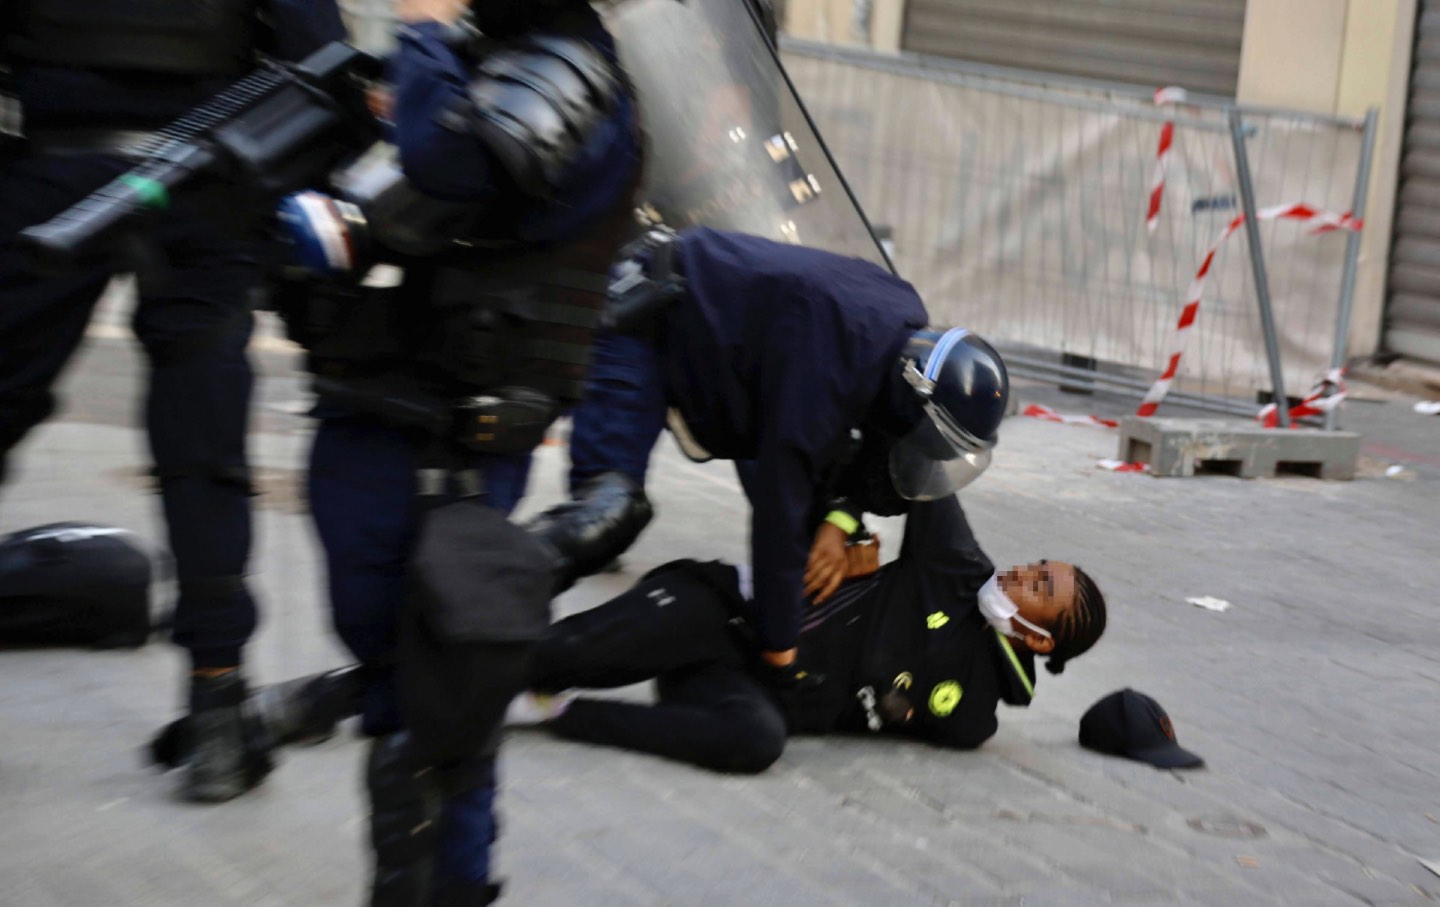 Armed French police use force against civilian, force him on to the ground